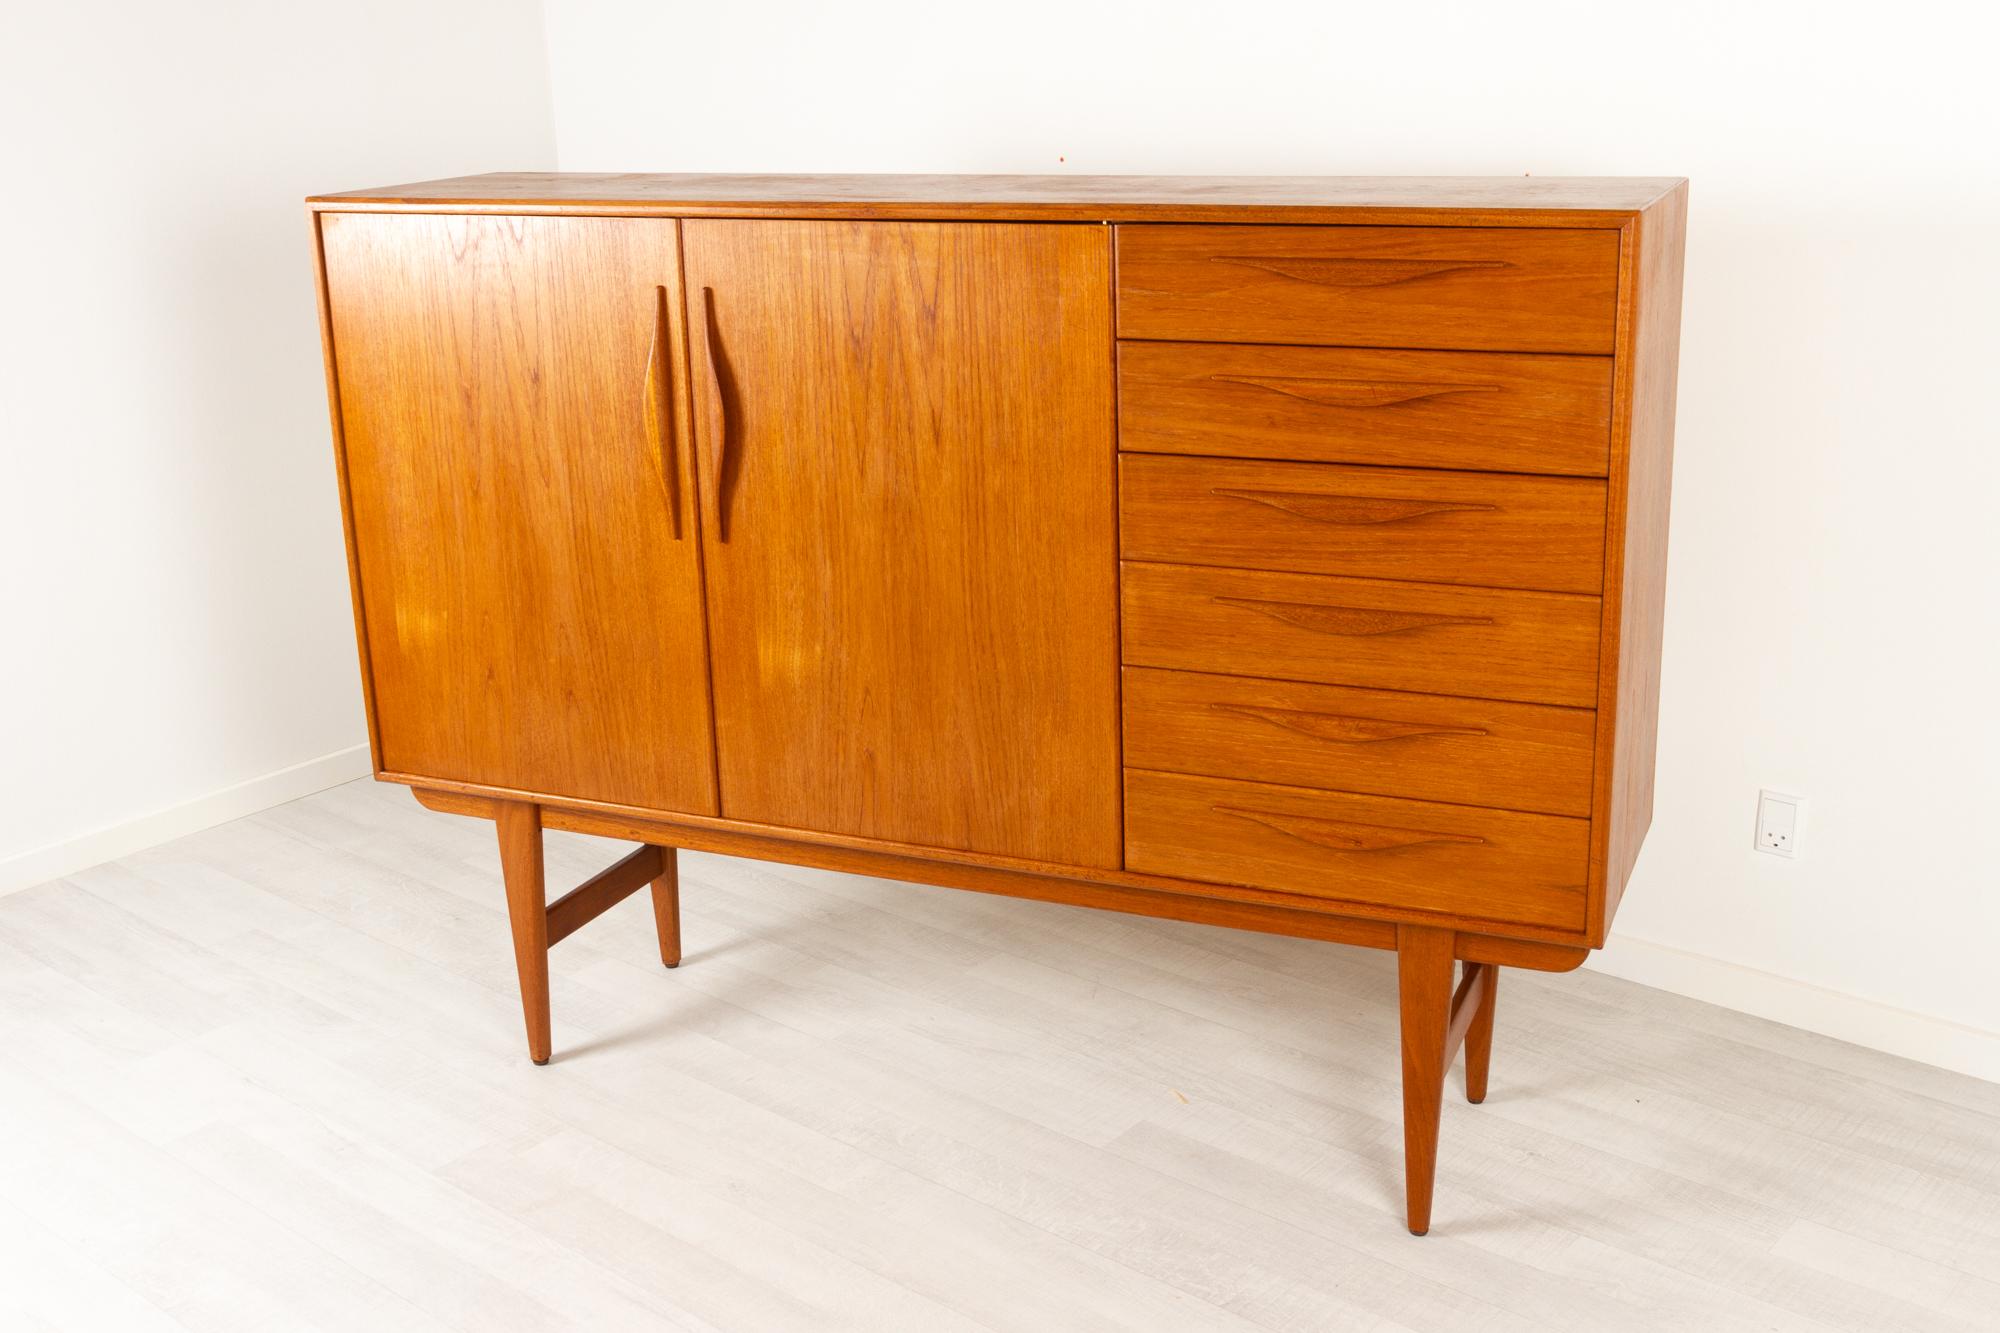 Vintage Danish tall teak sideboard, 1960s
Very elegant Danish modern highboard. Six drawers with pulls in sculpted solid teak. Top drawer lined with green felt. Large compartment with double hinged doors, also with pulls in solid teak and two full